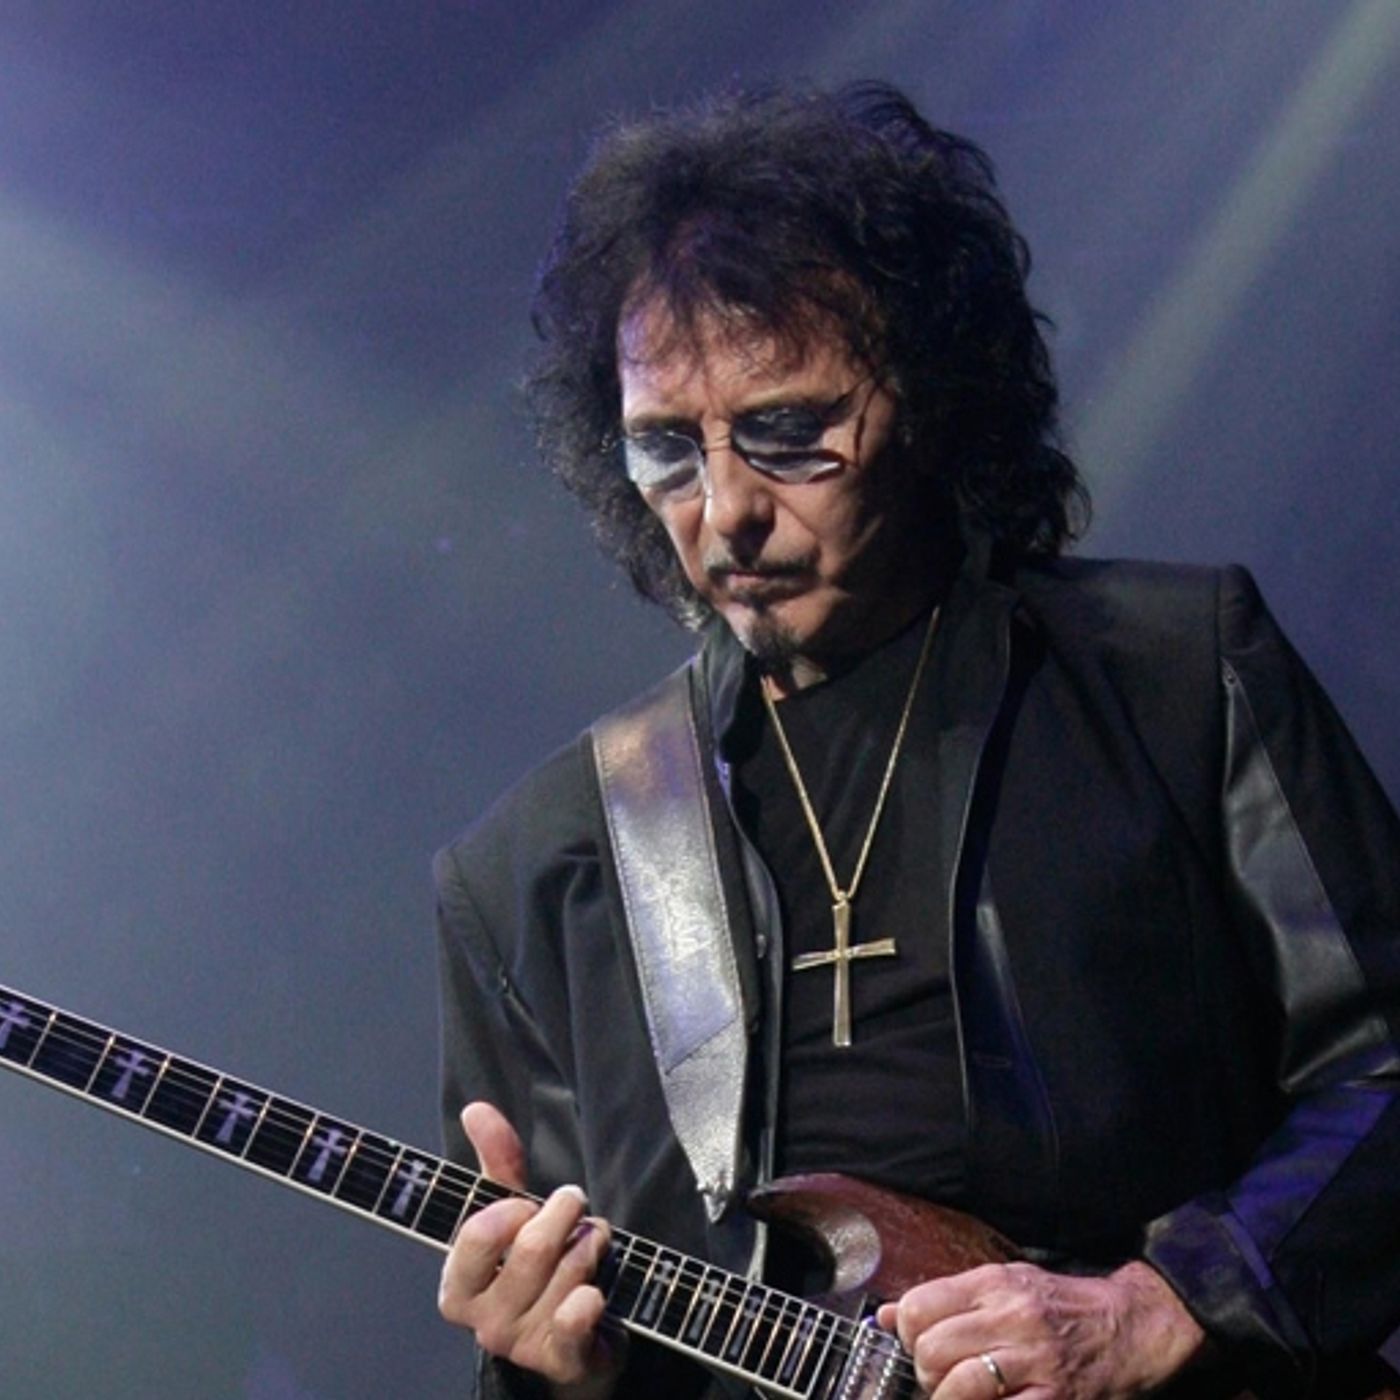 Tony Iommi reveals the lump in his throat wasn't cancerous and talks about writing music for Birmingham Cathedral